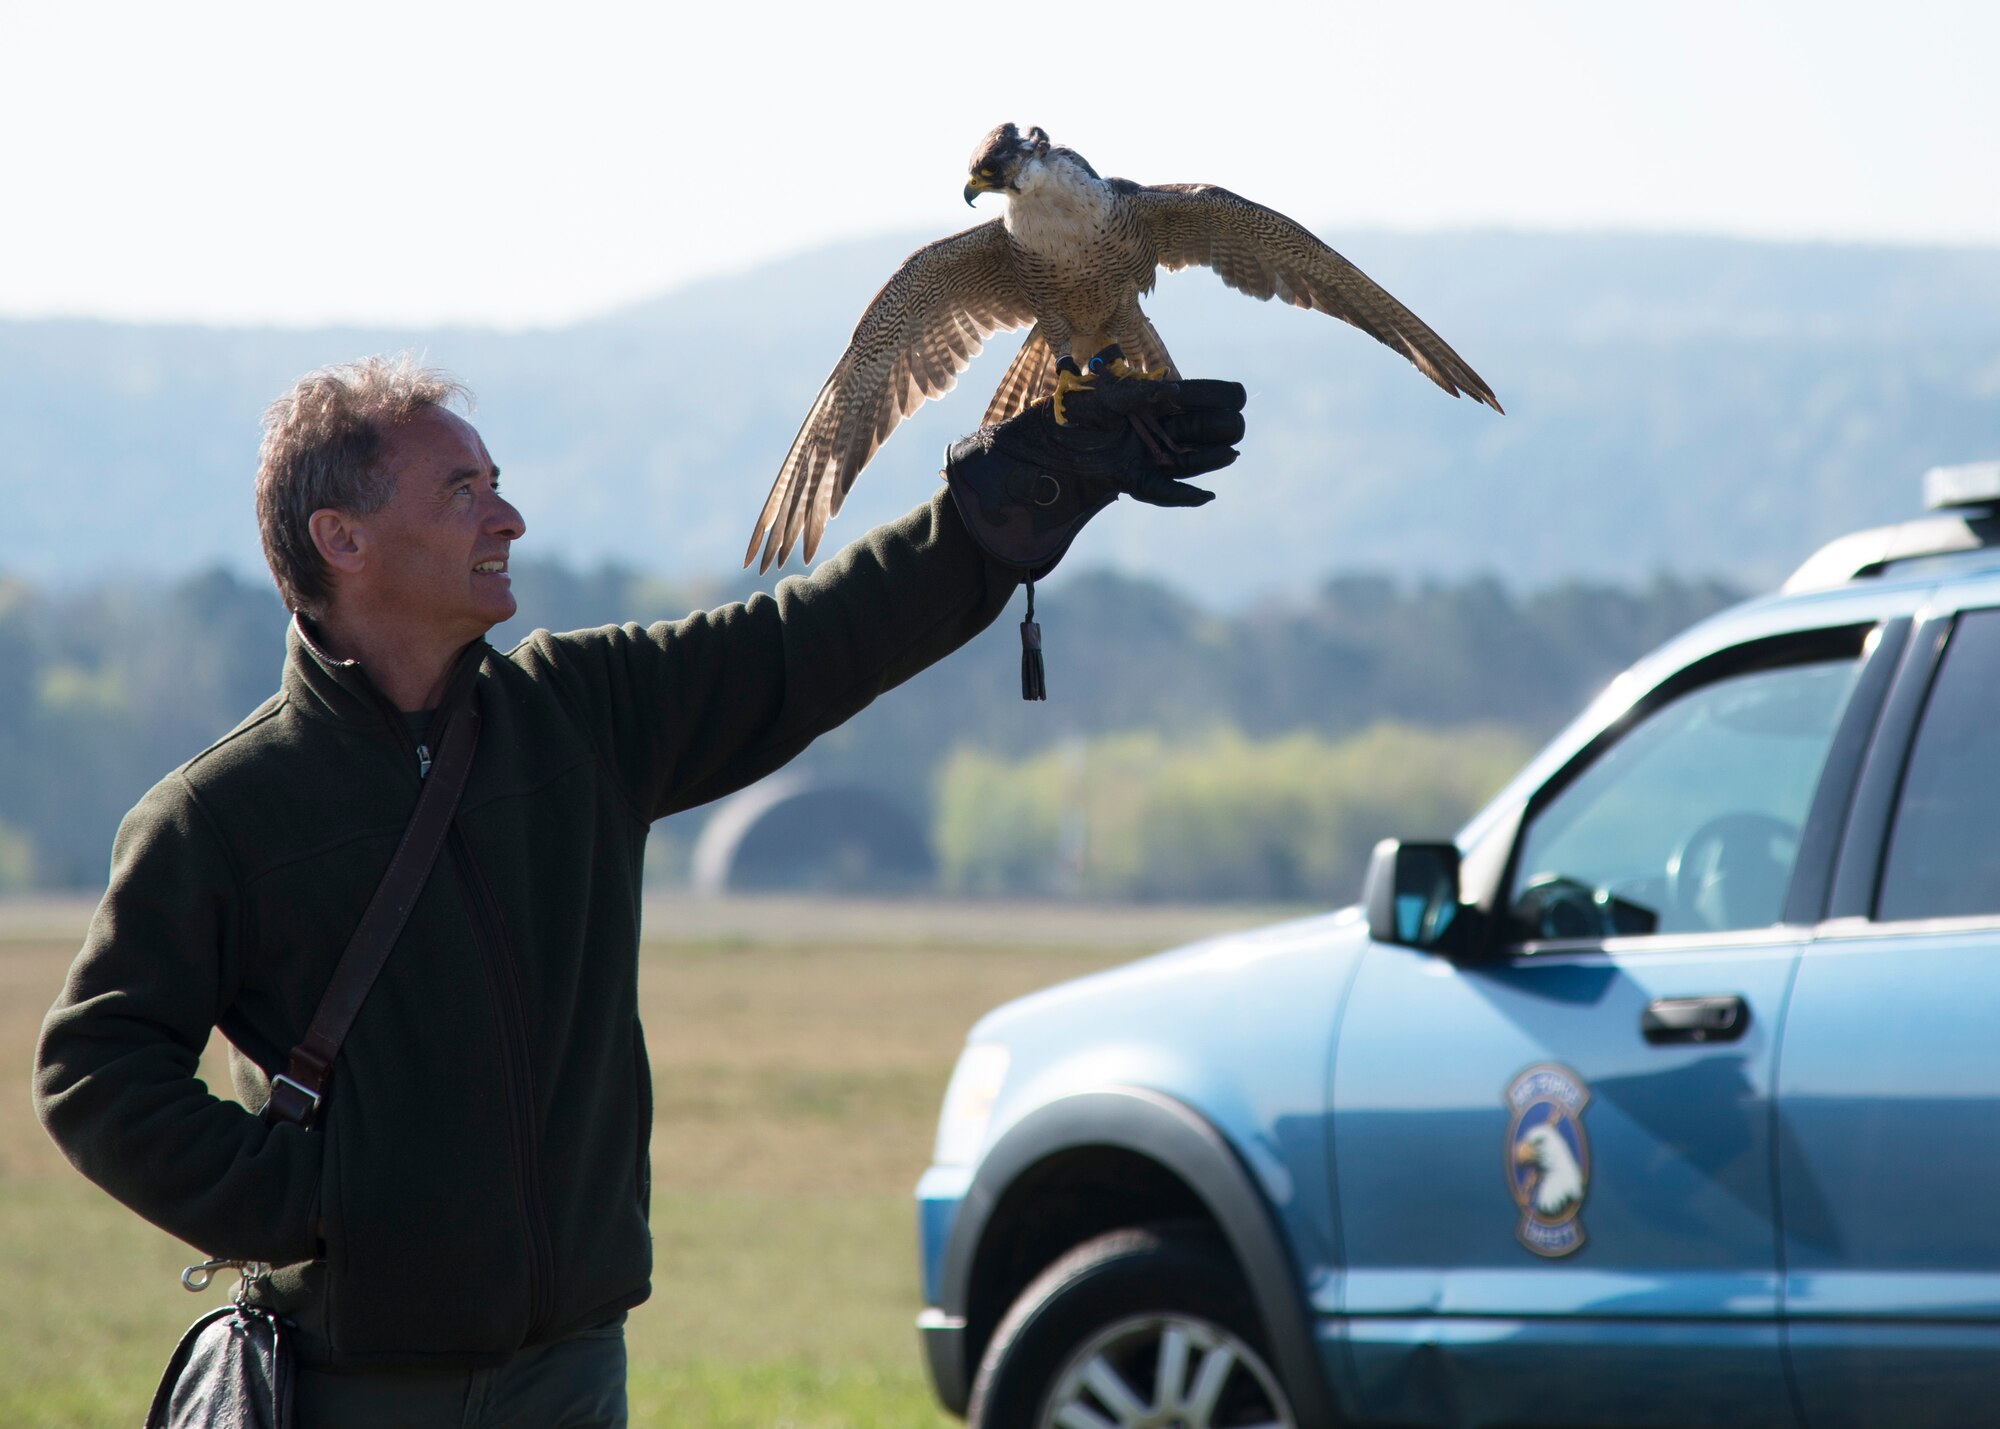 A peregrine falcon perches on its handler as part of an Earth Day demonstration on Ramstein Air Base, Germany, April 17, 2018.